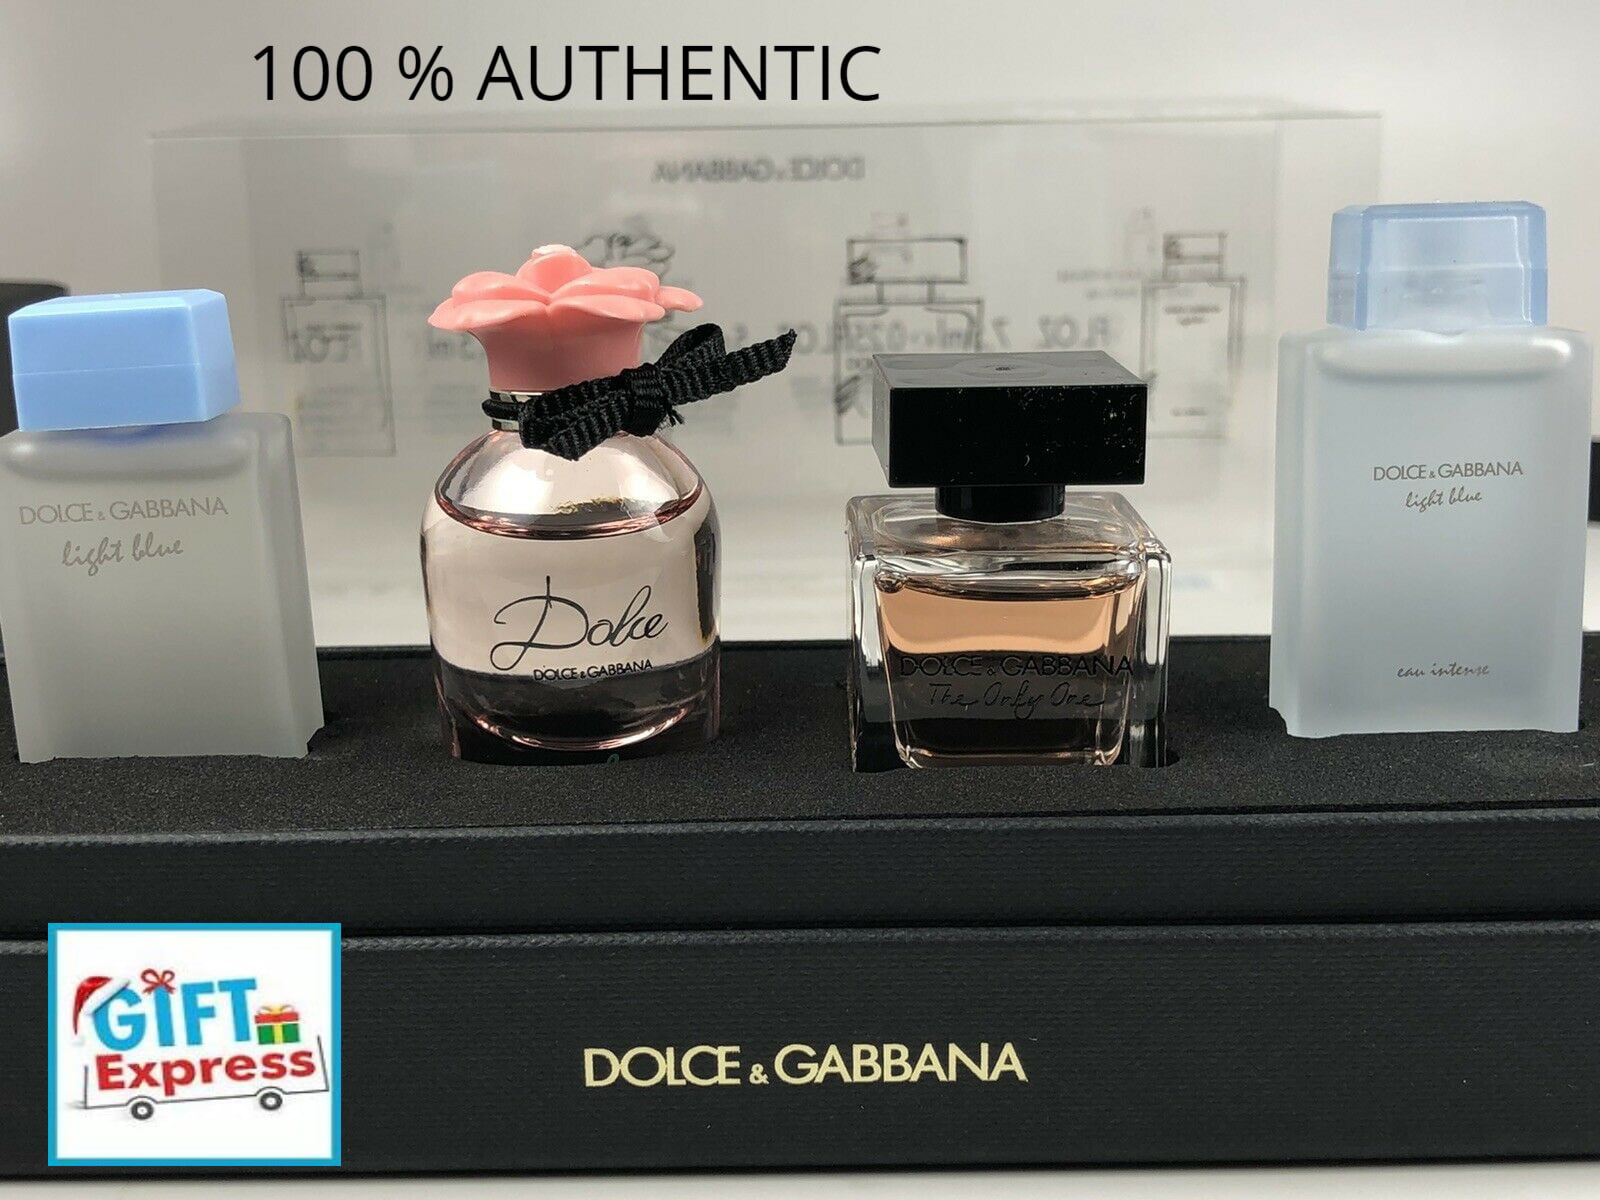 dolce and gabbana small perfume